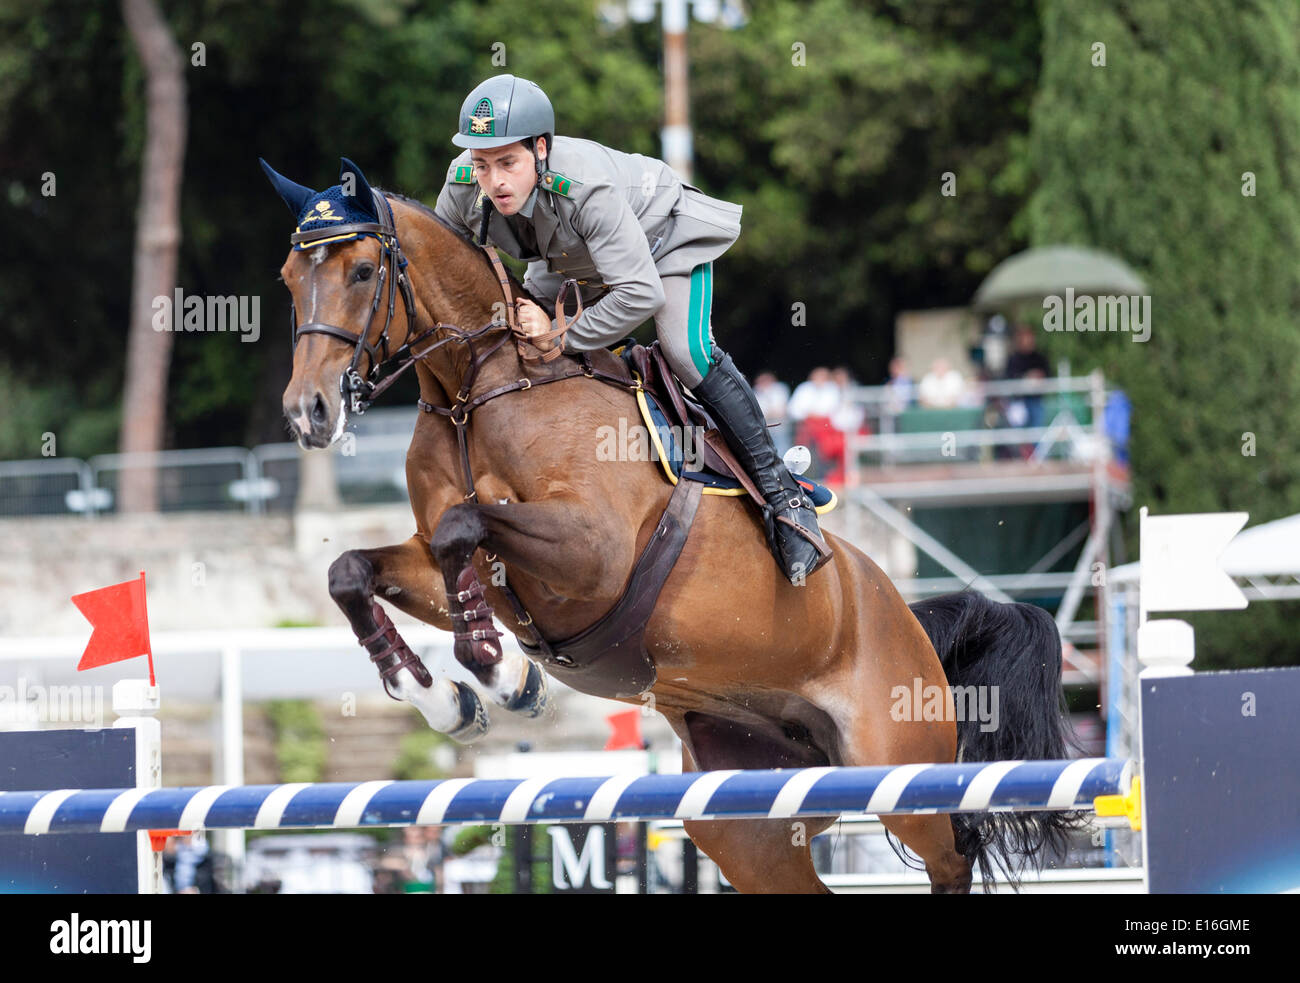 Rome, Italy. 24th May, 2014. Furusiyya FEI Nations Cup Show jumping competition at Piazza di Siena. Emanuele Gaudiano on Cocoshynsky for Italy, Piazza di Siena, Rome, Italy. 5/23/14 Credit:  Stephen Bisgrove/Alamy Live News Stock Photo